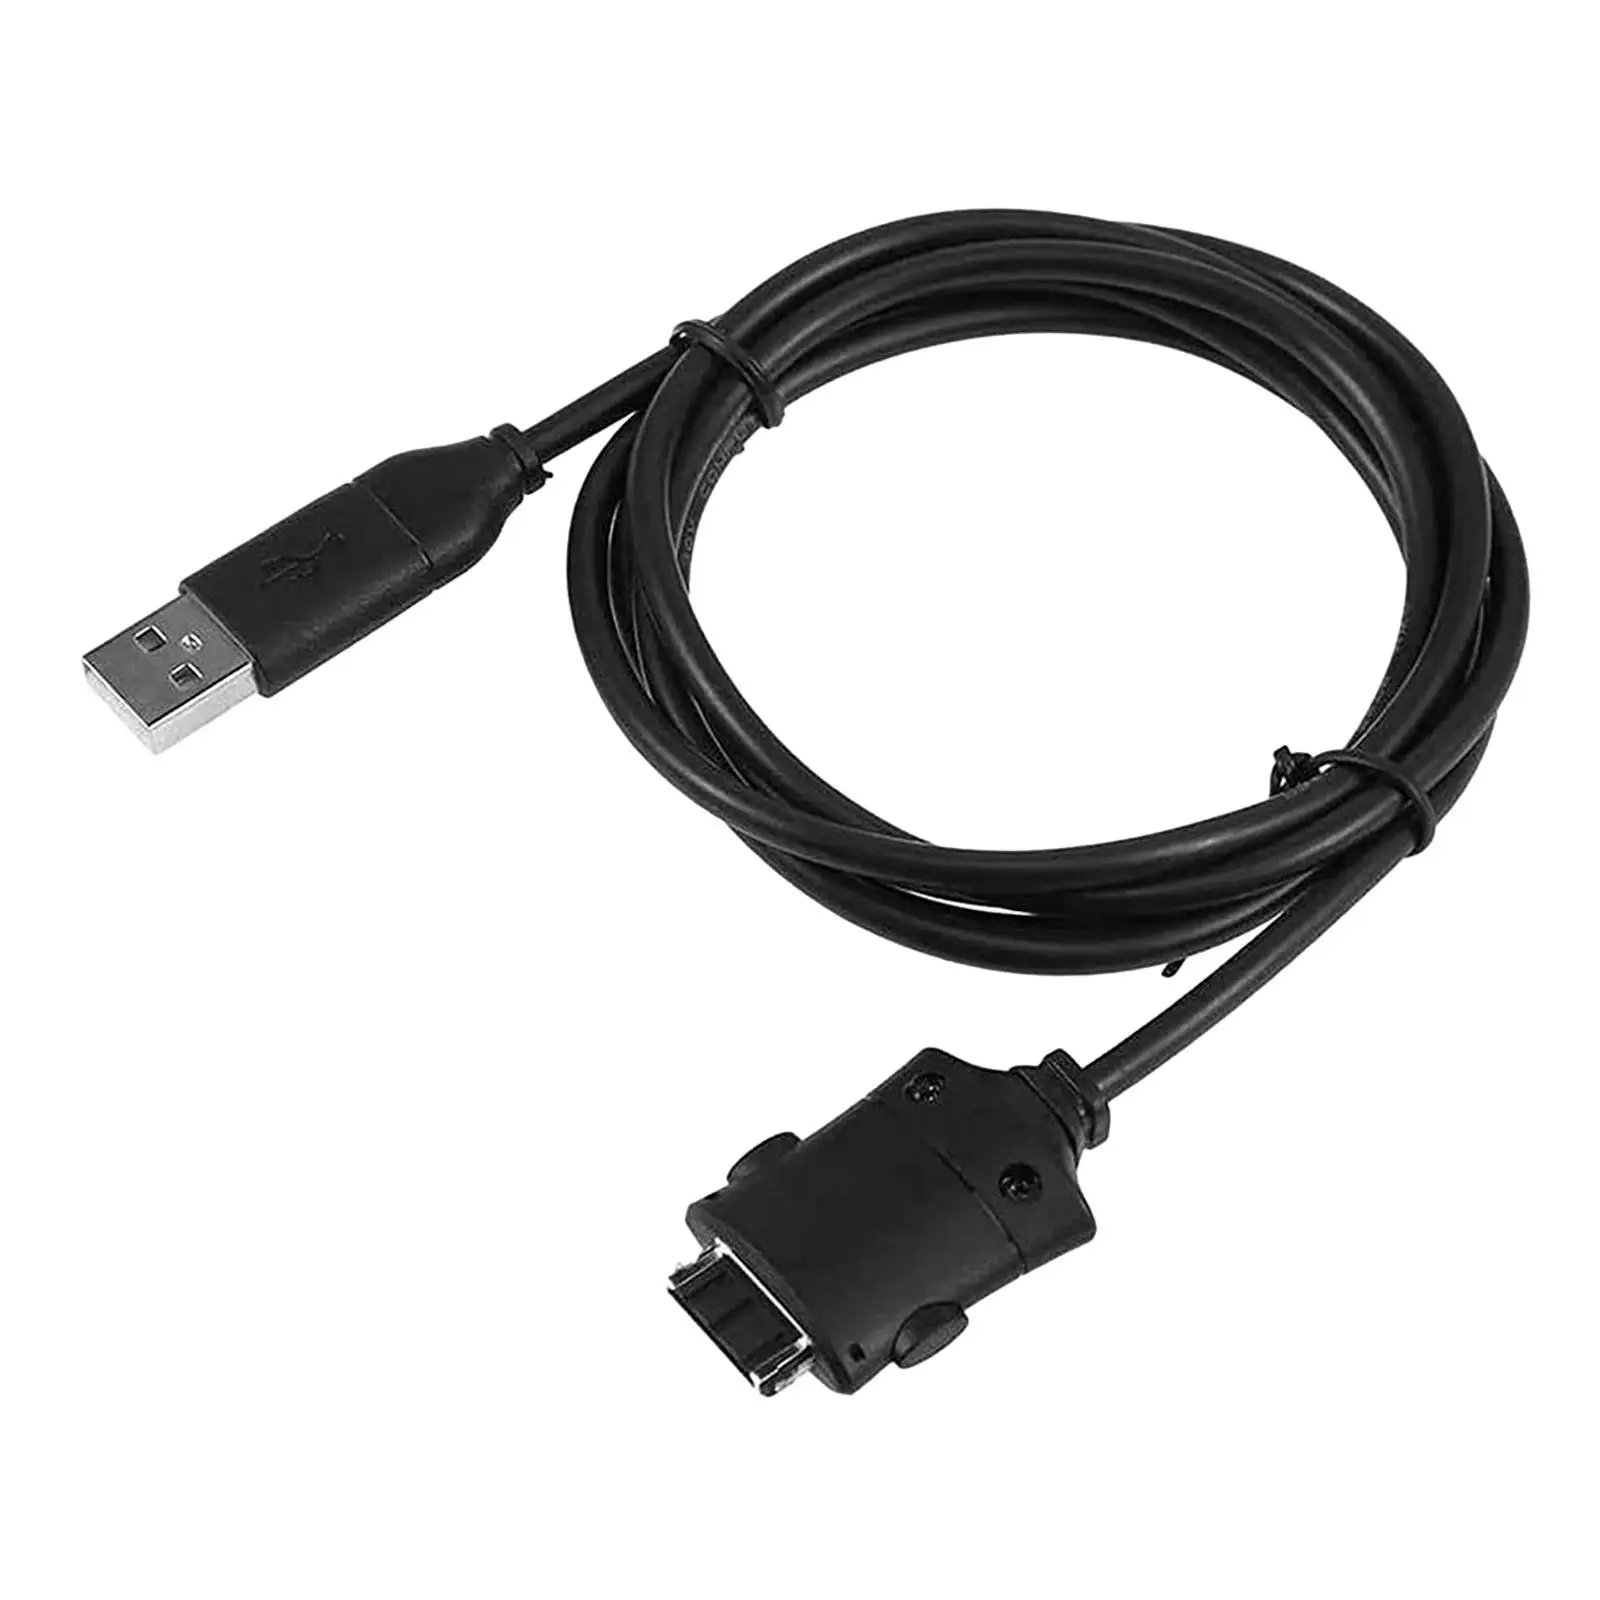 Suc-c2 USB Data Charging Cable Cord Accessories Professional Replacement Transfer Cord Black for Digital Camera L730 L73 i7 Nv11